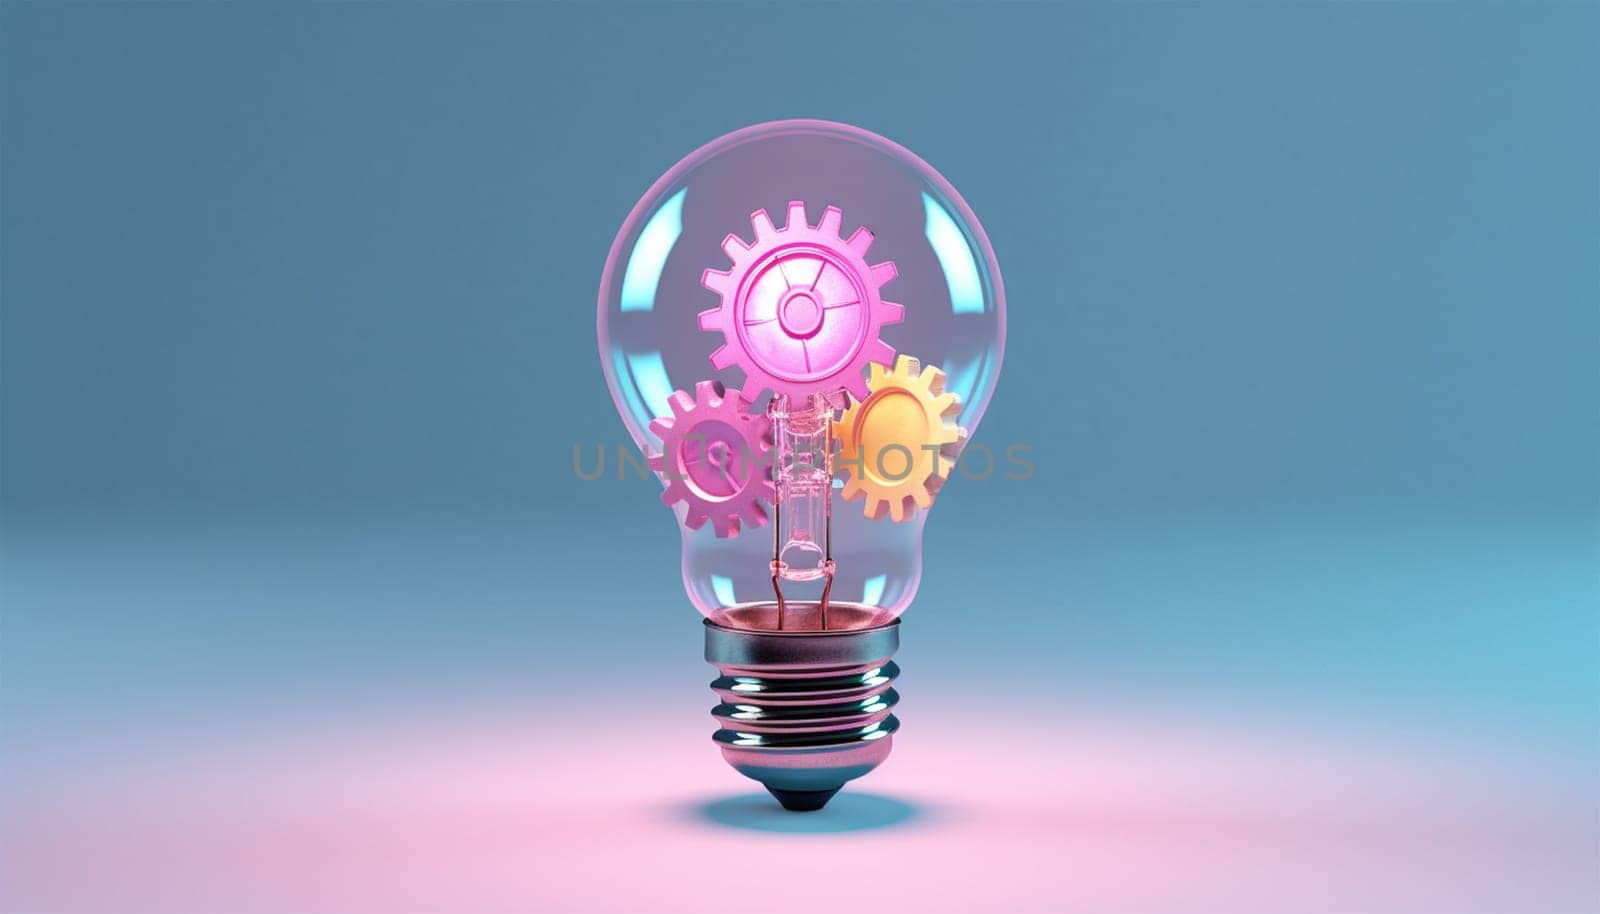 Light bulb and gears 3d render. Innovation concept. Insight icon isolated on pastel background. 3D Illustration. Pink,purple and blue. Glow Idea,teamwork,brainstorming design by Annebel146